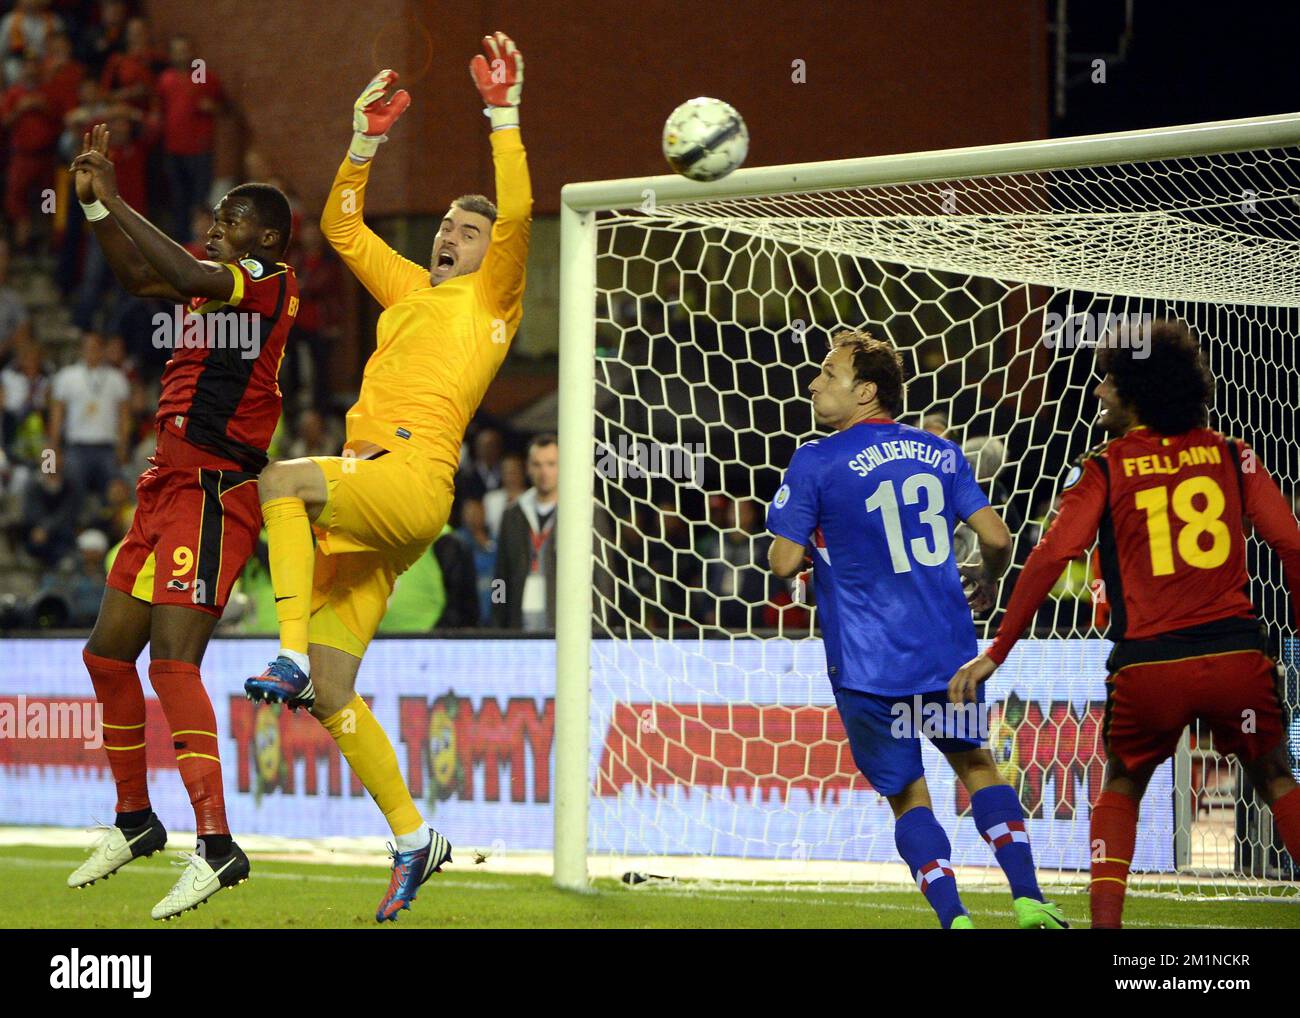 20120911 - BRUSSELS, BELGIUM: Belgium's Christian Benteke, Croatian's goalkeeper Stipe Pletikosa, Croatian's Gordon Schildenfeld and Belgium's Marouane Fellaini in action during the qualifying match between Belgium Red Devils and Croatia, Tuesday 11 September 2012 at the King Baudouin stadium, in Brussels. This is the second of ten qualifying games for the 2014 Soccer World Championships. BELGA PHOTO ERIC LALMAND Stock Photo